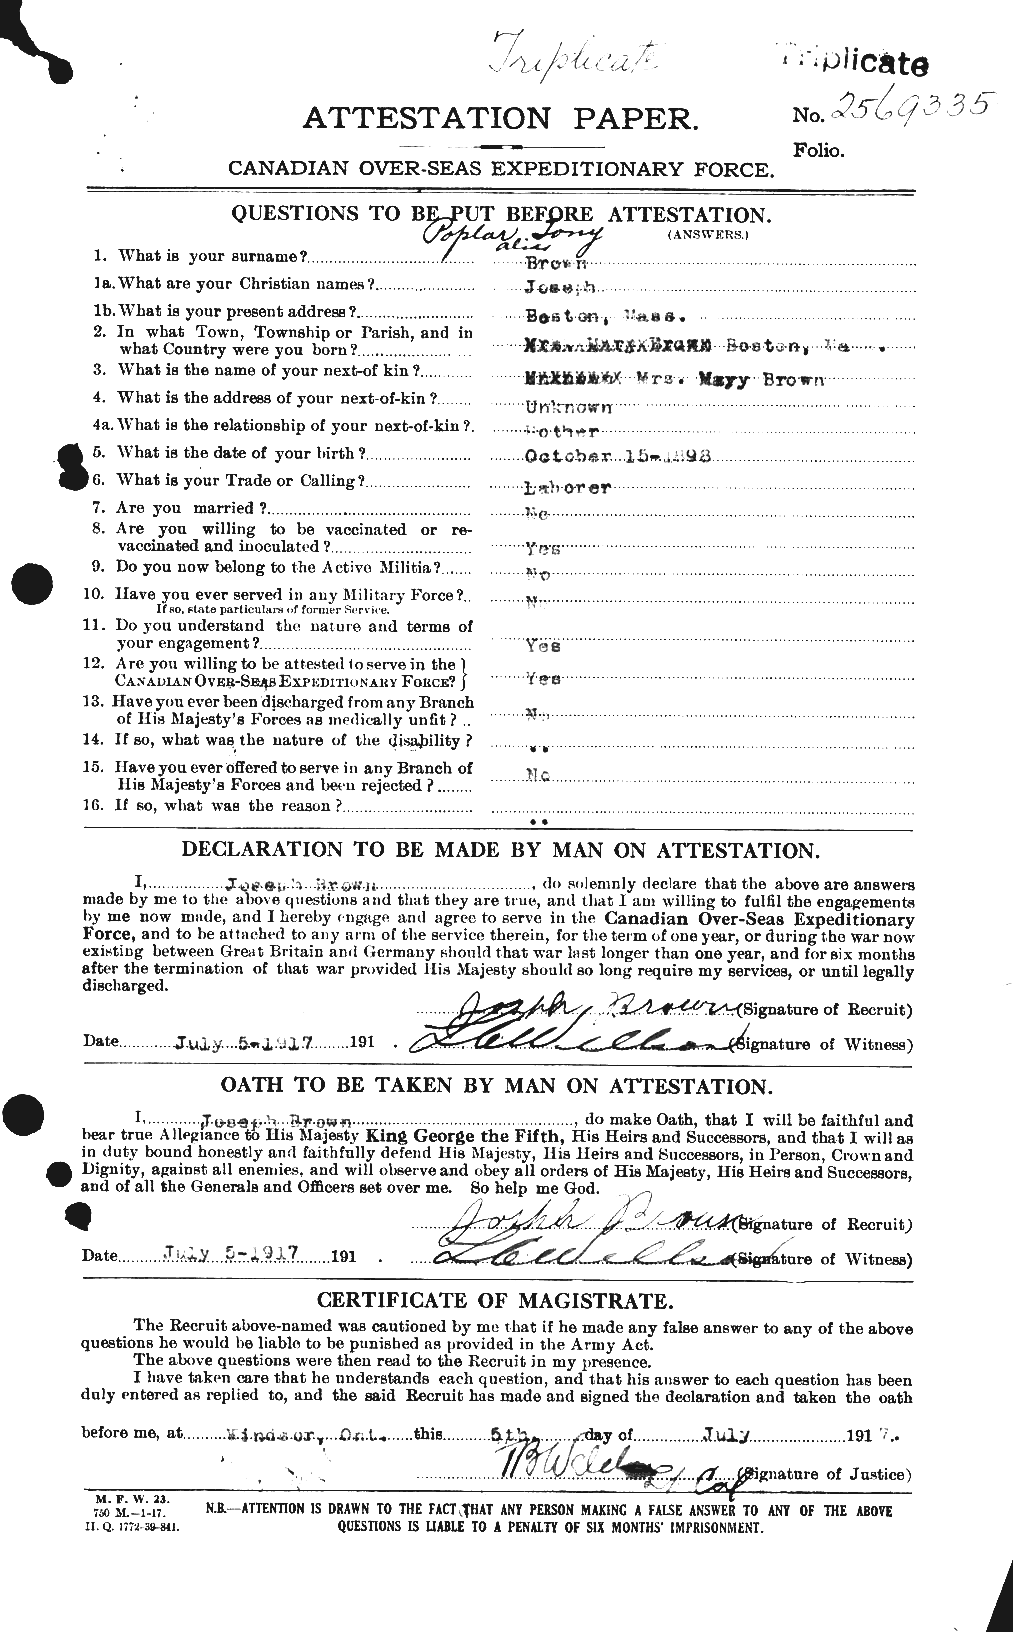 Personnel Records of the First World War - CEF 581583a